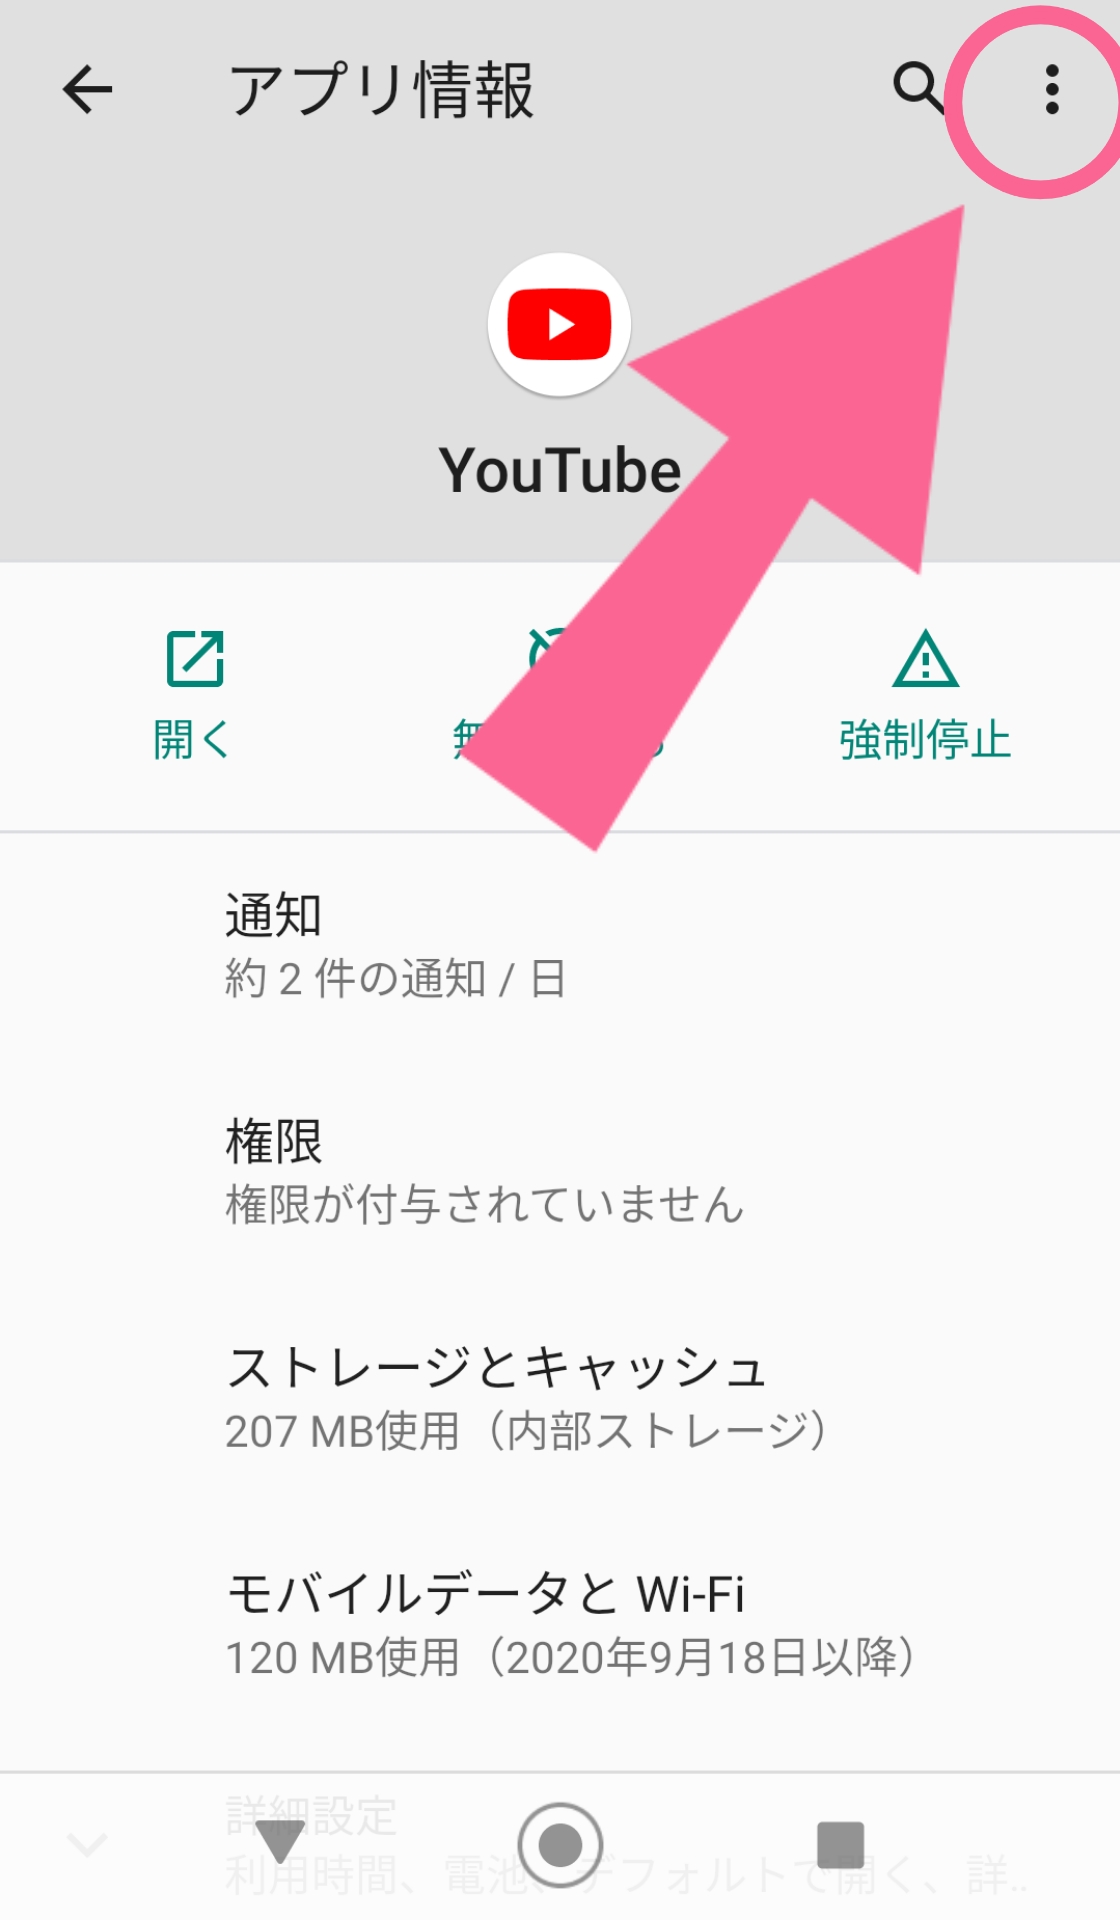 Android　設定　点々マーク　右上　タップ